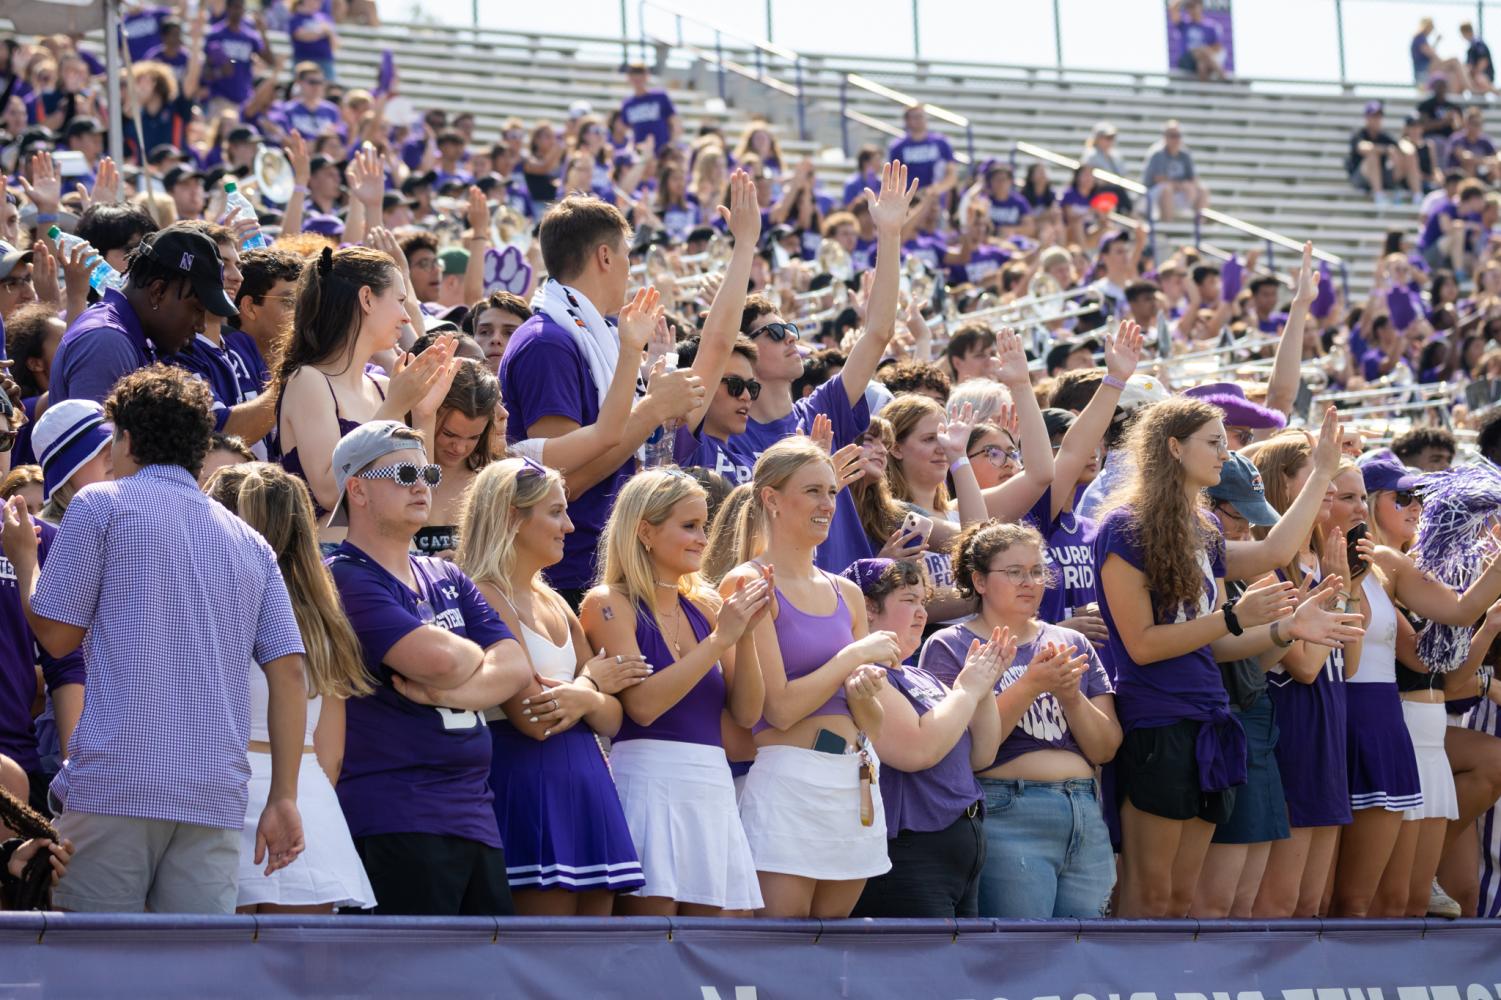 People dressed in purple cheer in the stands of a football stadium.